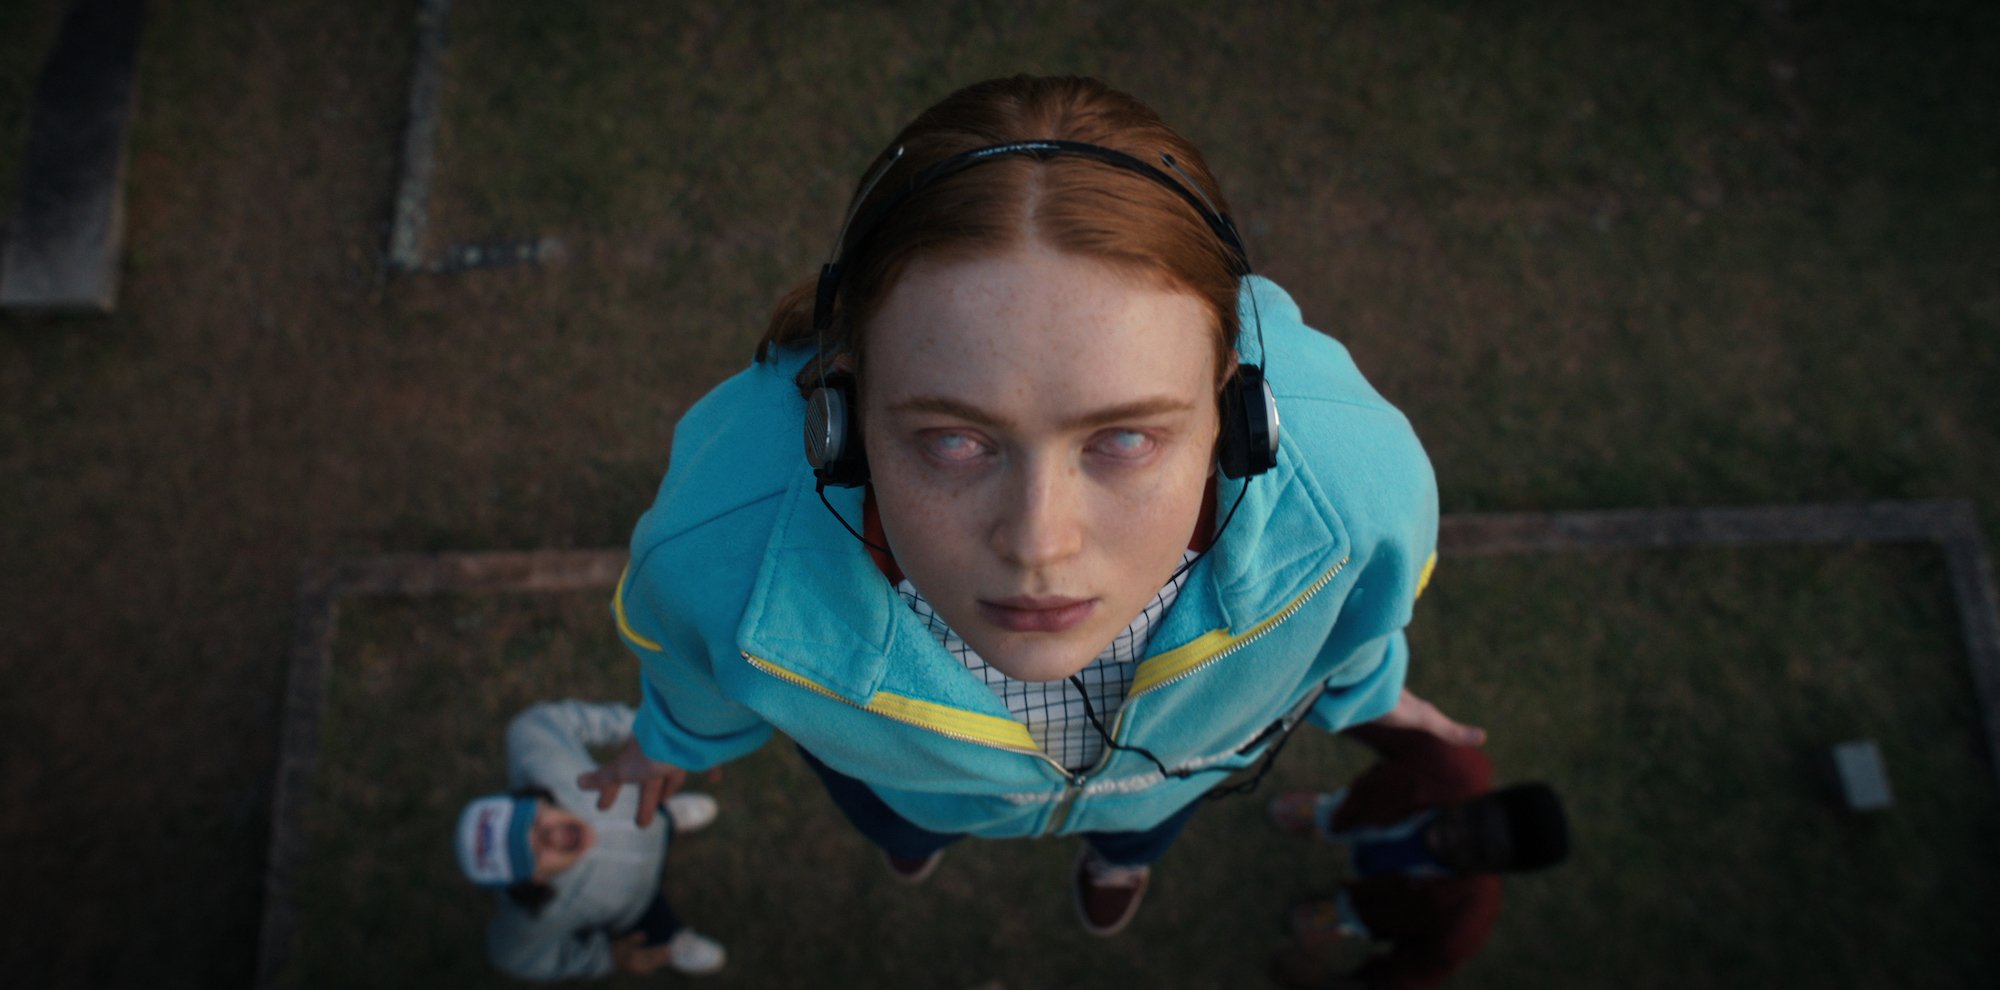 Sadie Sink as Max Mayfield wearing white contacts. Does Max die in 'Stranger Things' Season 4?